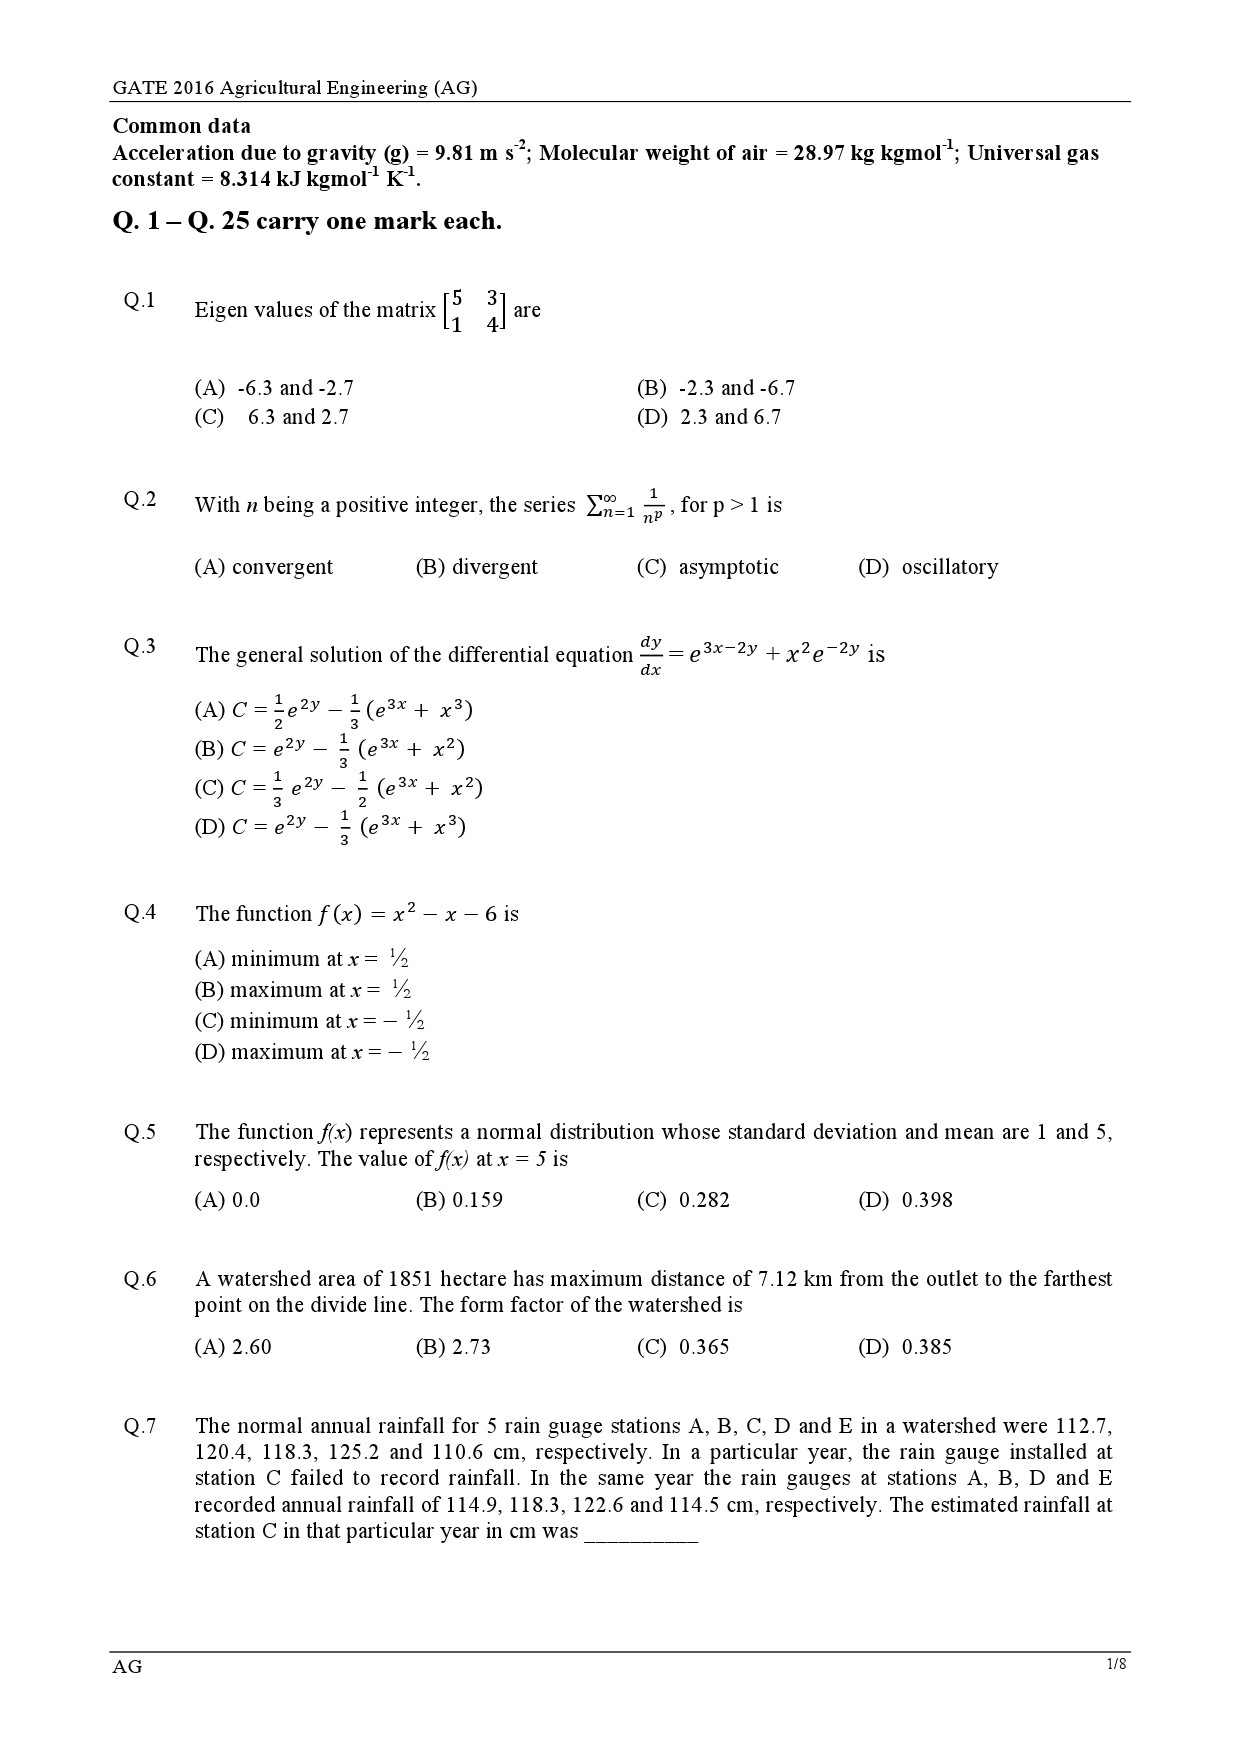 GATE Exam Question Paper 2016 Agricultural Engineering 1